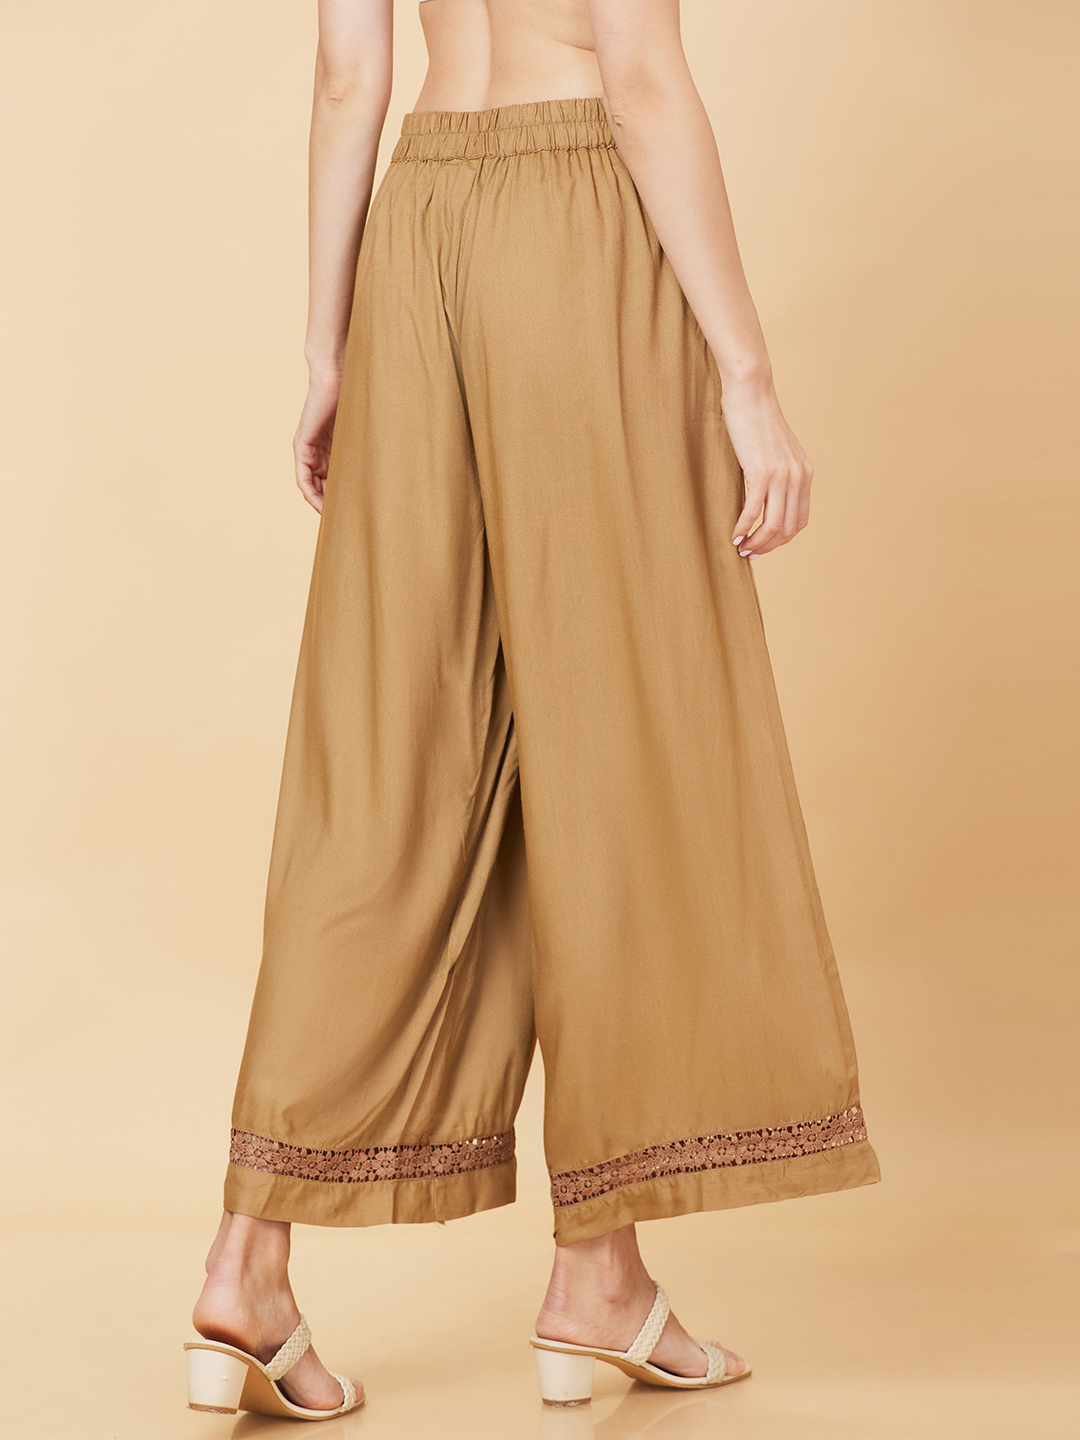 Globus Women Beige Solid Ethnic Wide Leg Palazzo with Lace at Hem